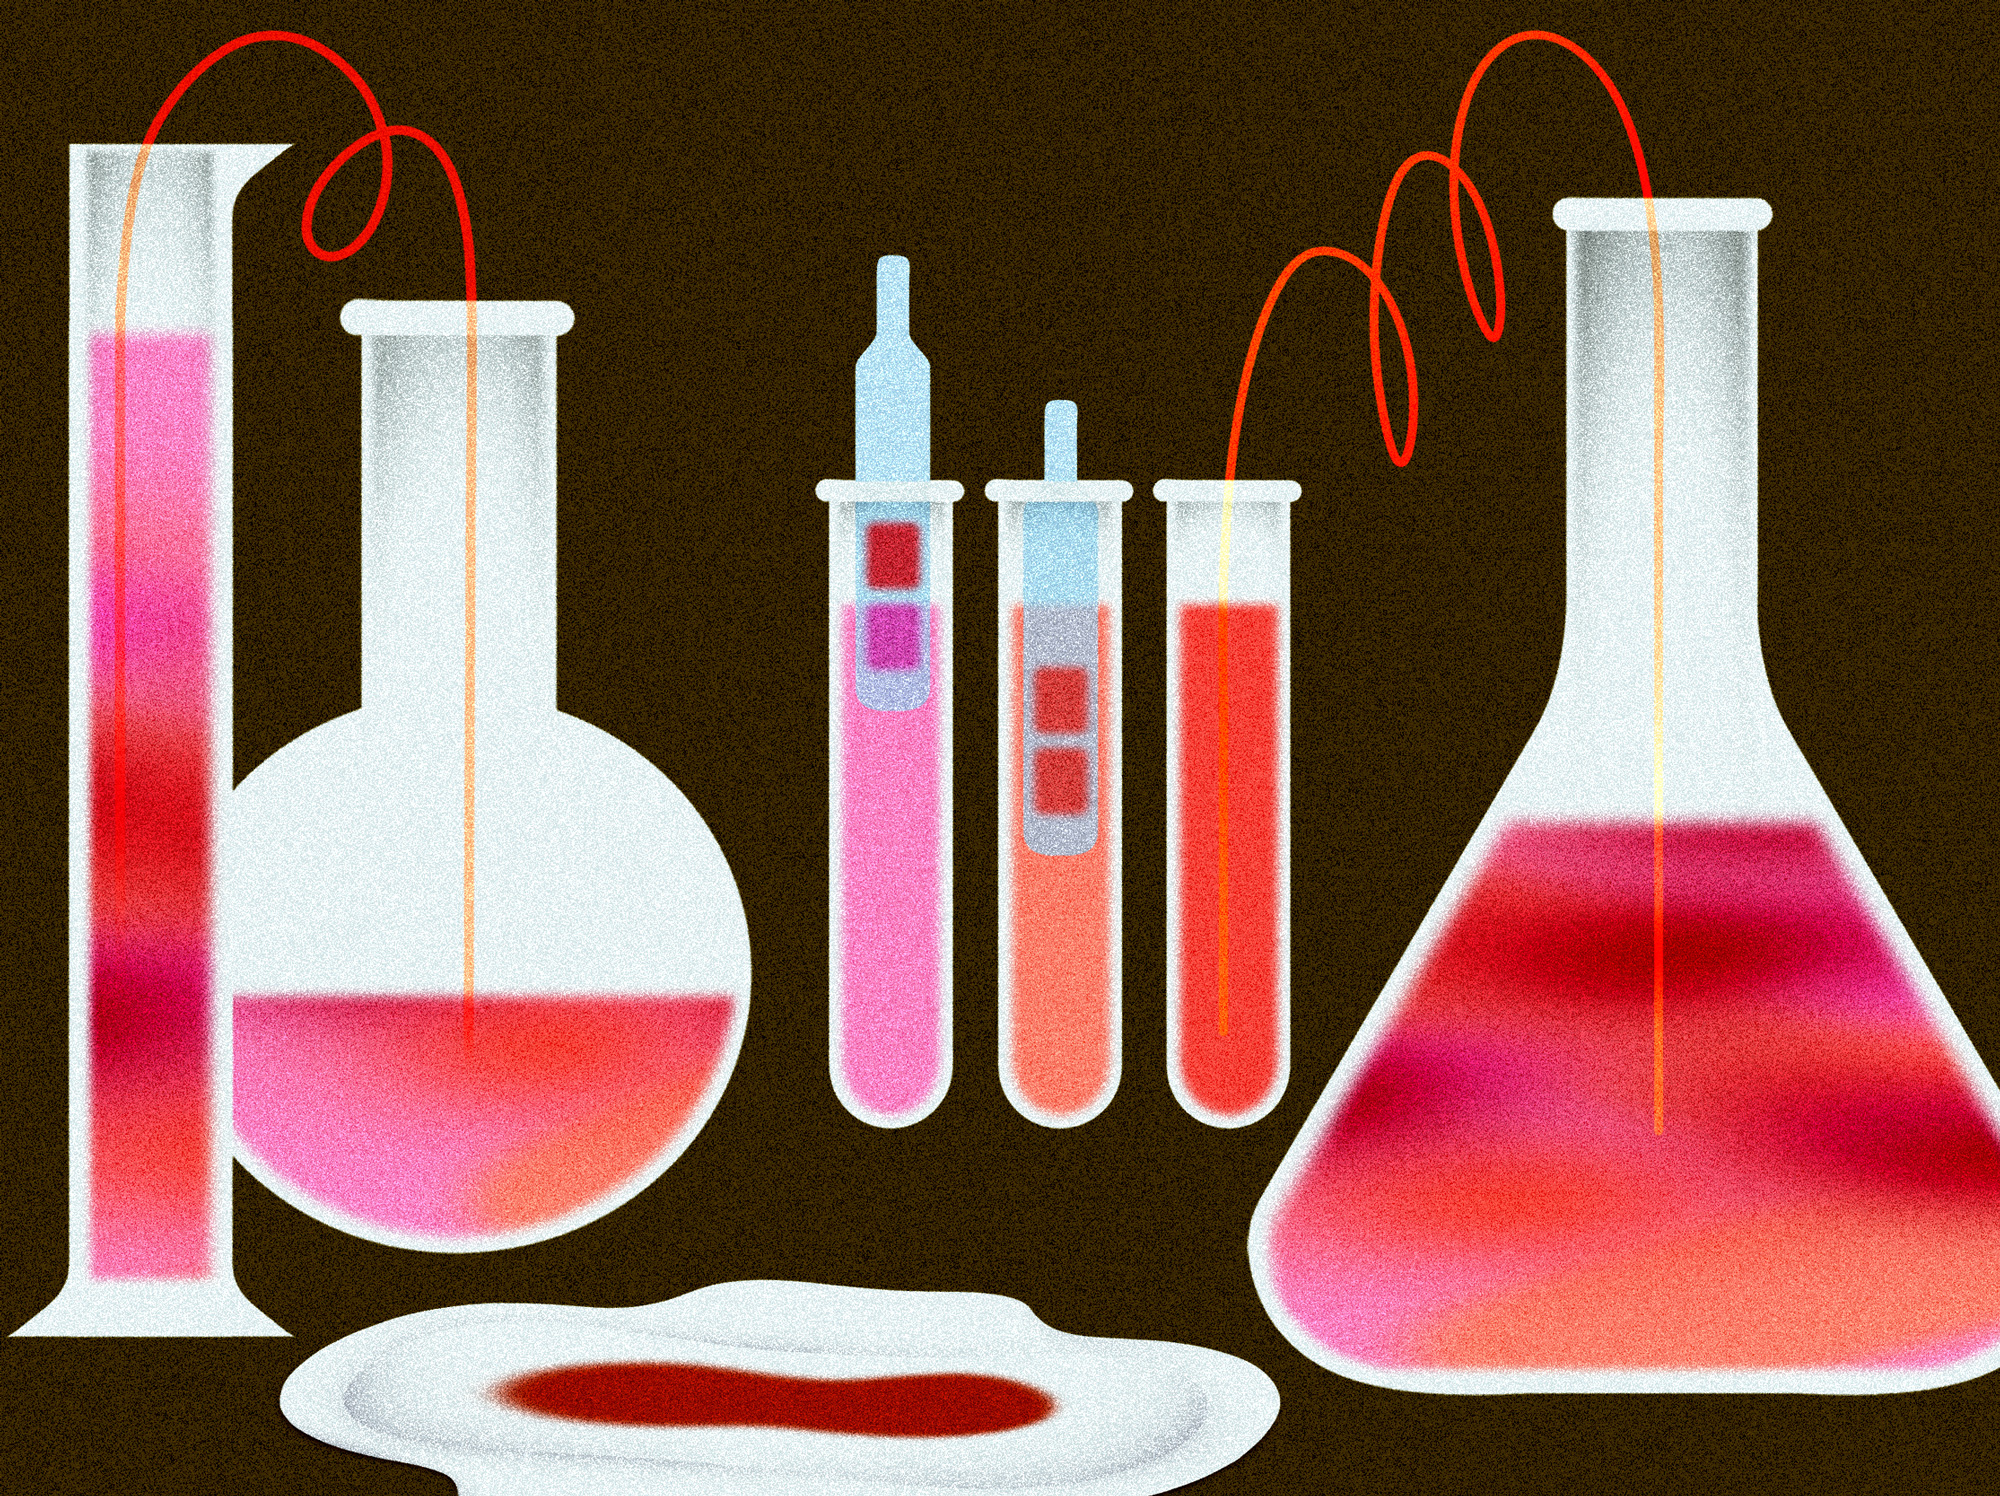 An illustration features test tubes of various shapes hold red and pink liquids. A pad in the foreground has a red patch.